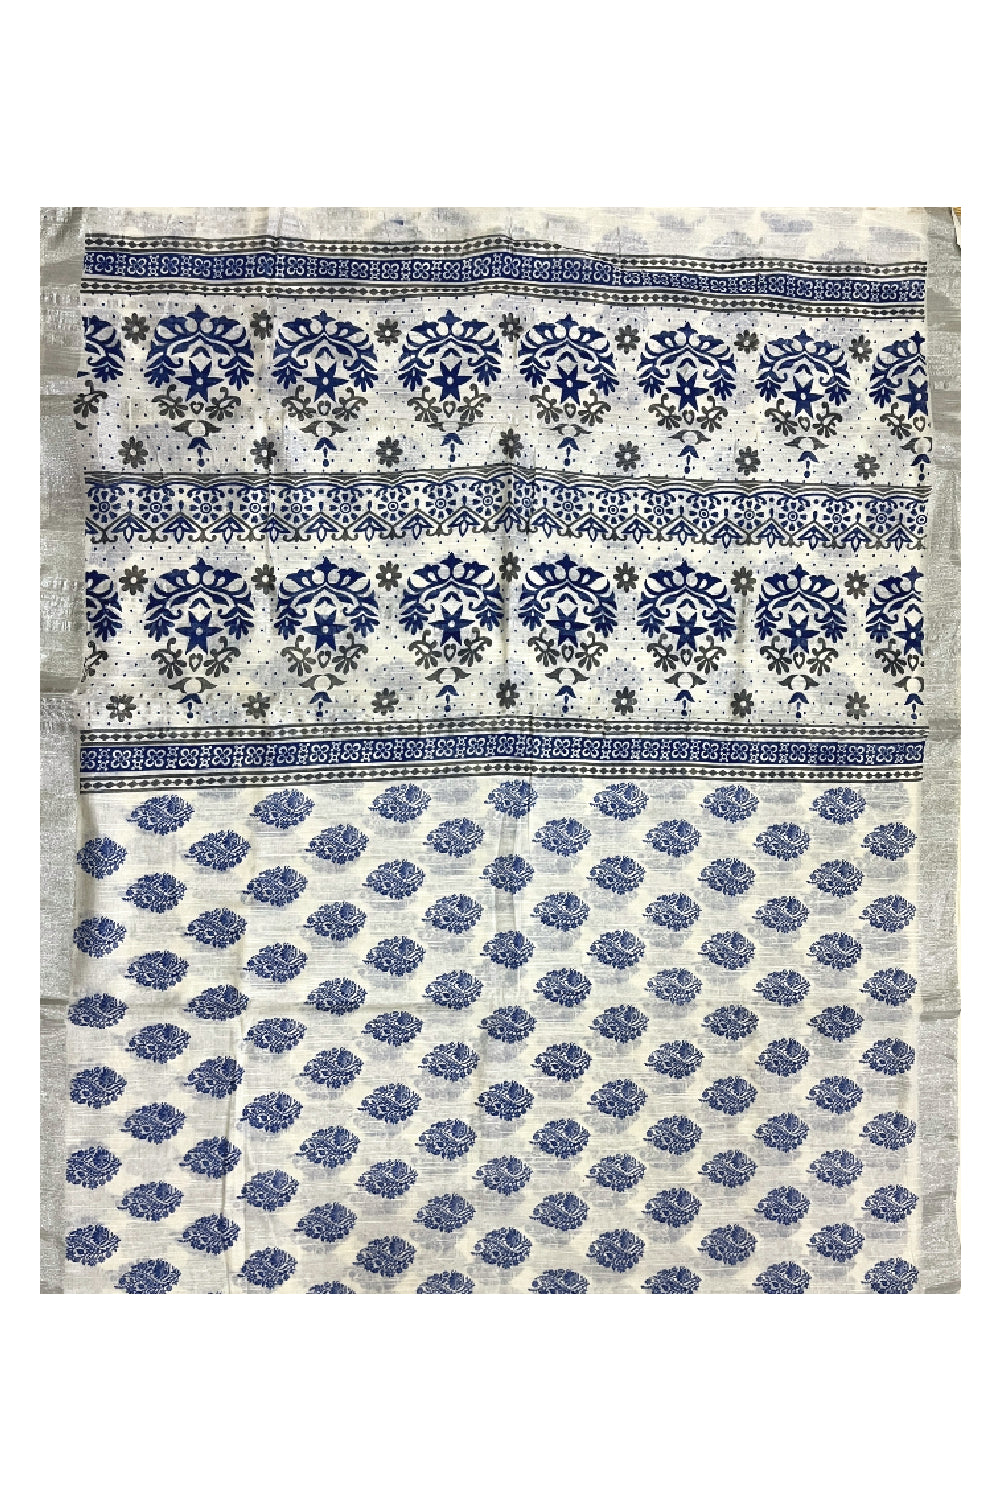 Southloom Linen White Saree with Blue Designer Prints and Tassels works on Pallu